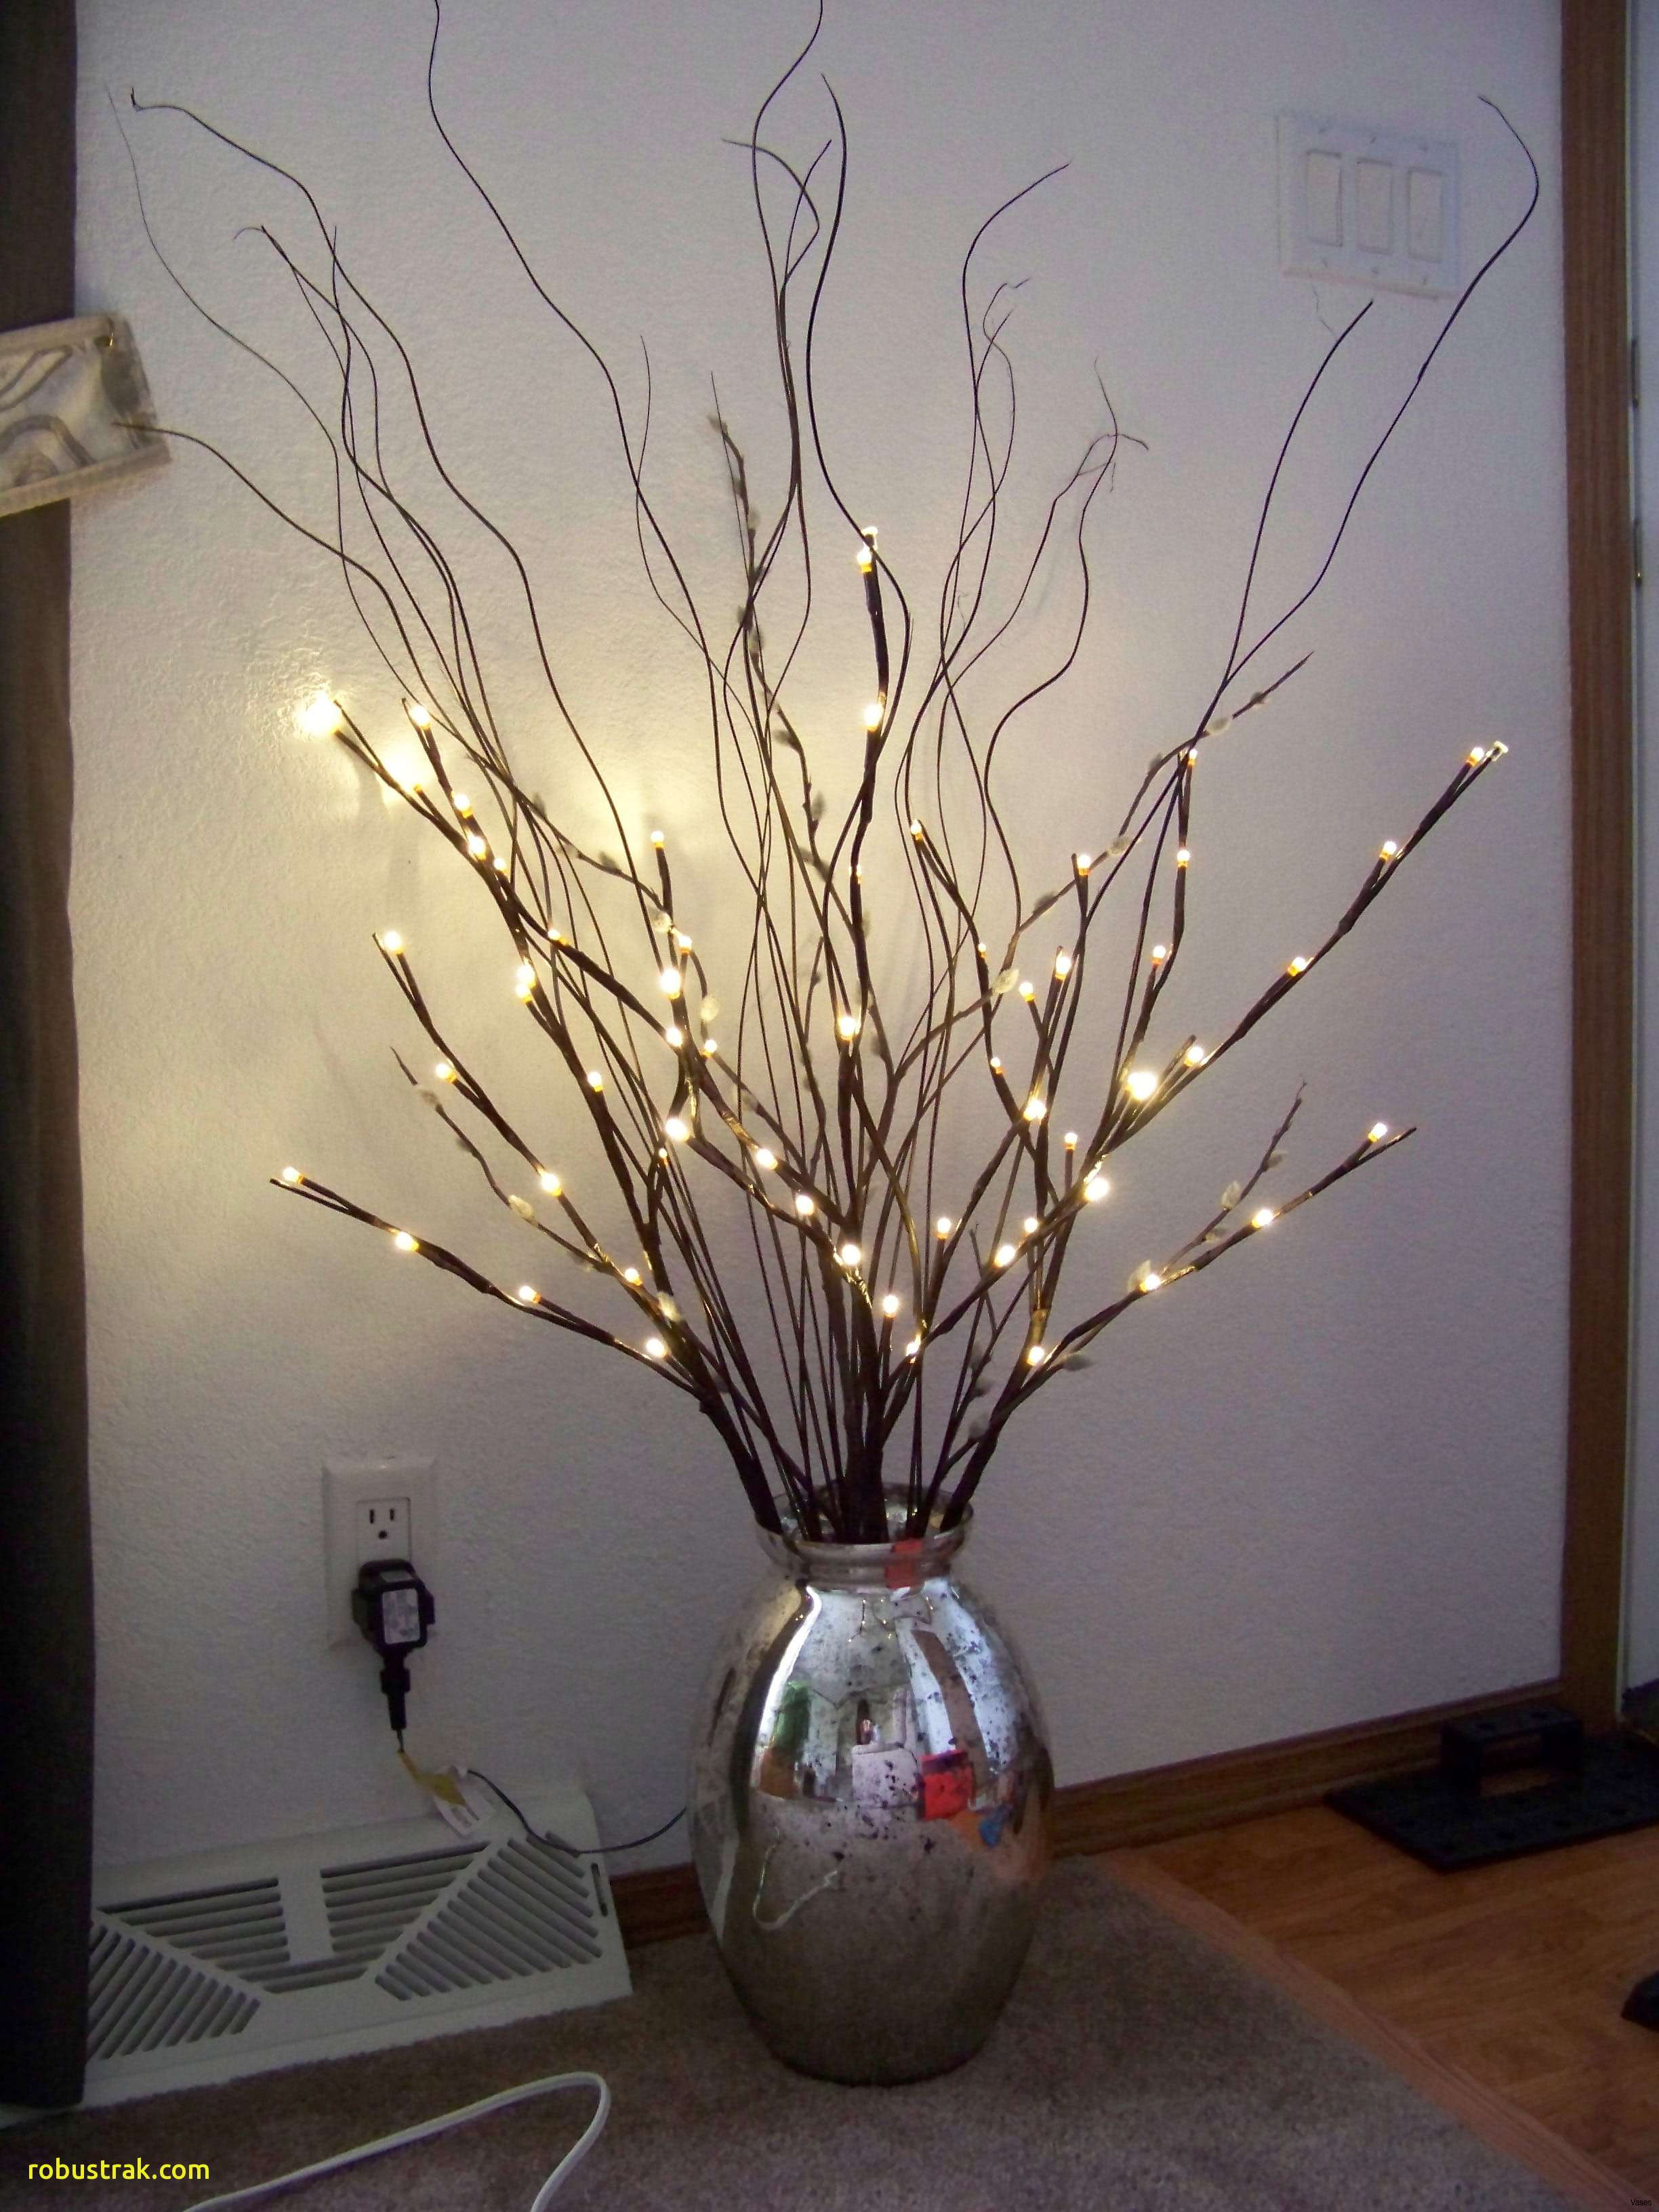 13 attractive Ideas to Fill A Vase 2024 free download ideas to fill a vase of lovely decorating with vases and twigs home design ideas within vases vase with twigs and lights 60cm indoor battery flower timer festive ltd twig i 13d